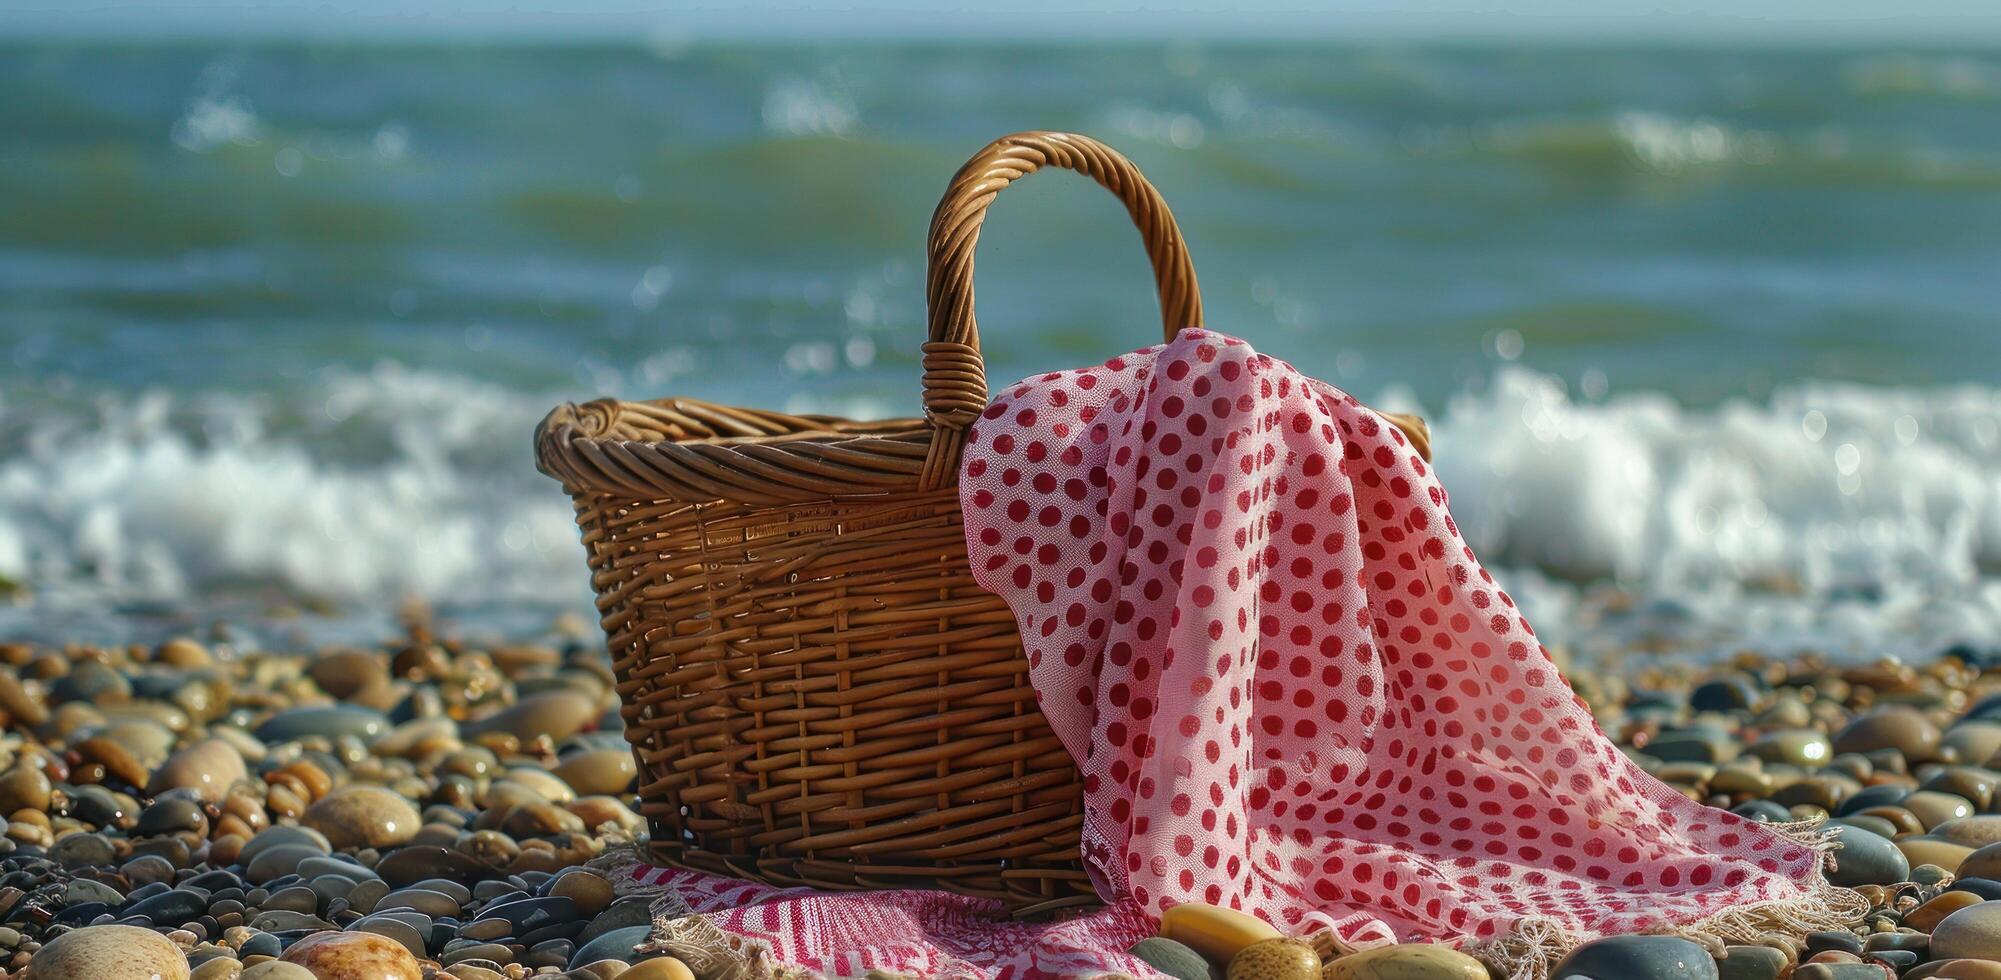 AI generated wicker basket on the beach with pink polka dot picnic blanket photo